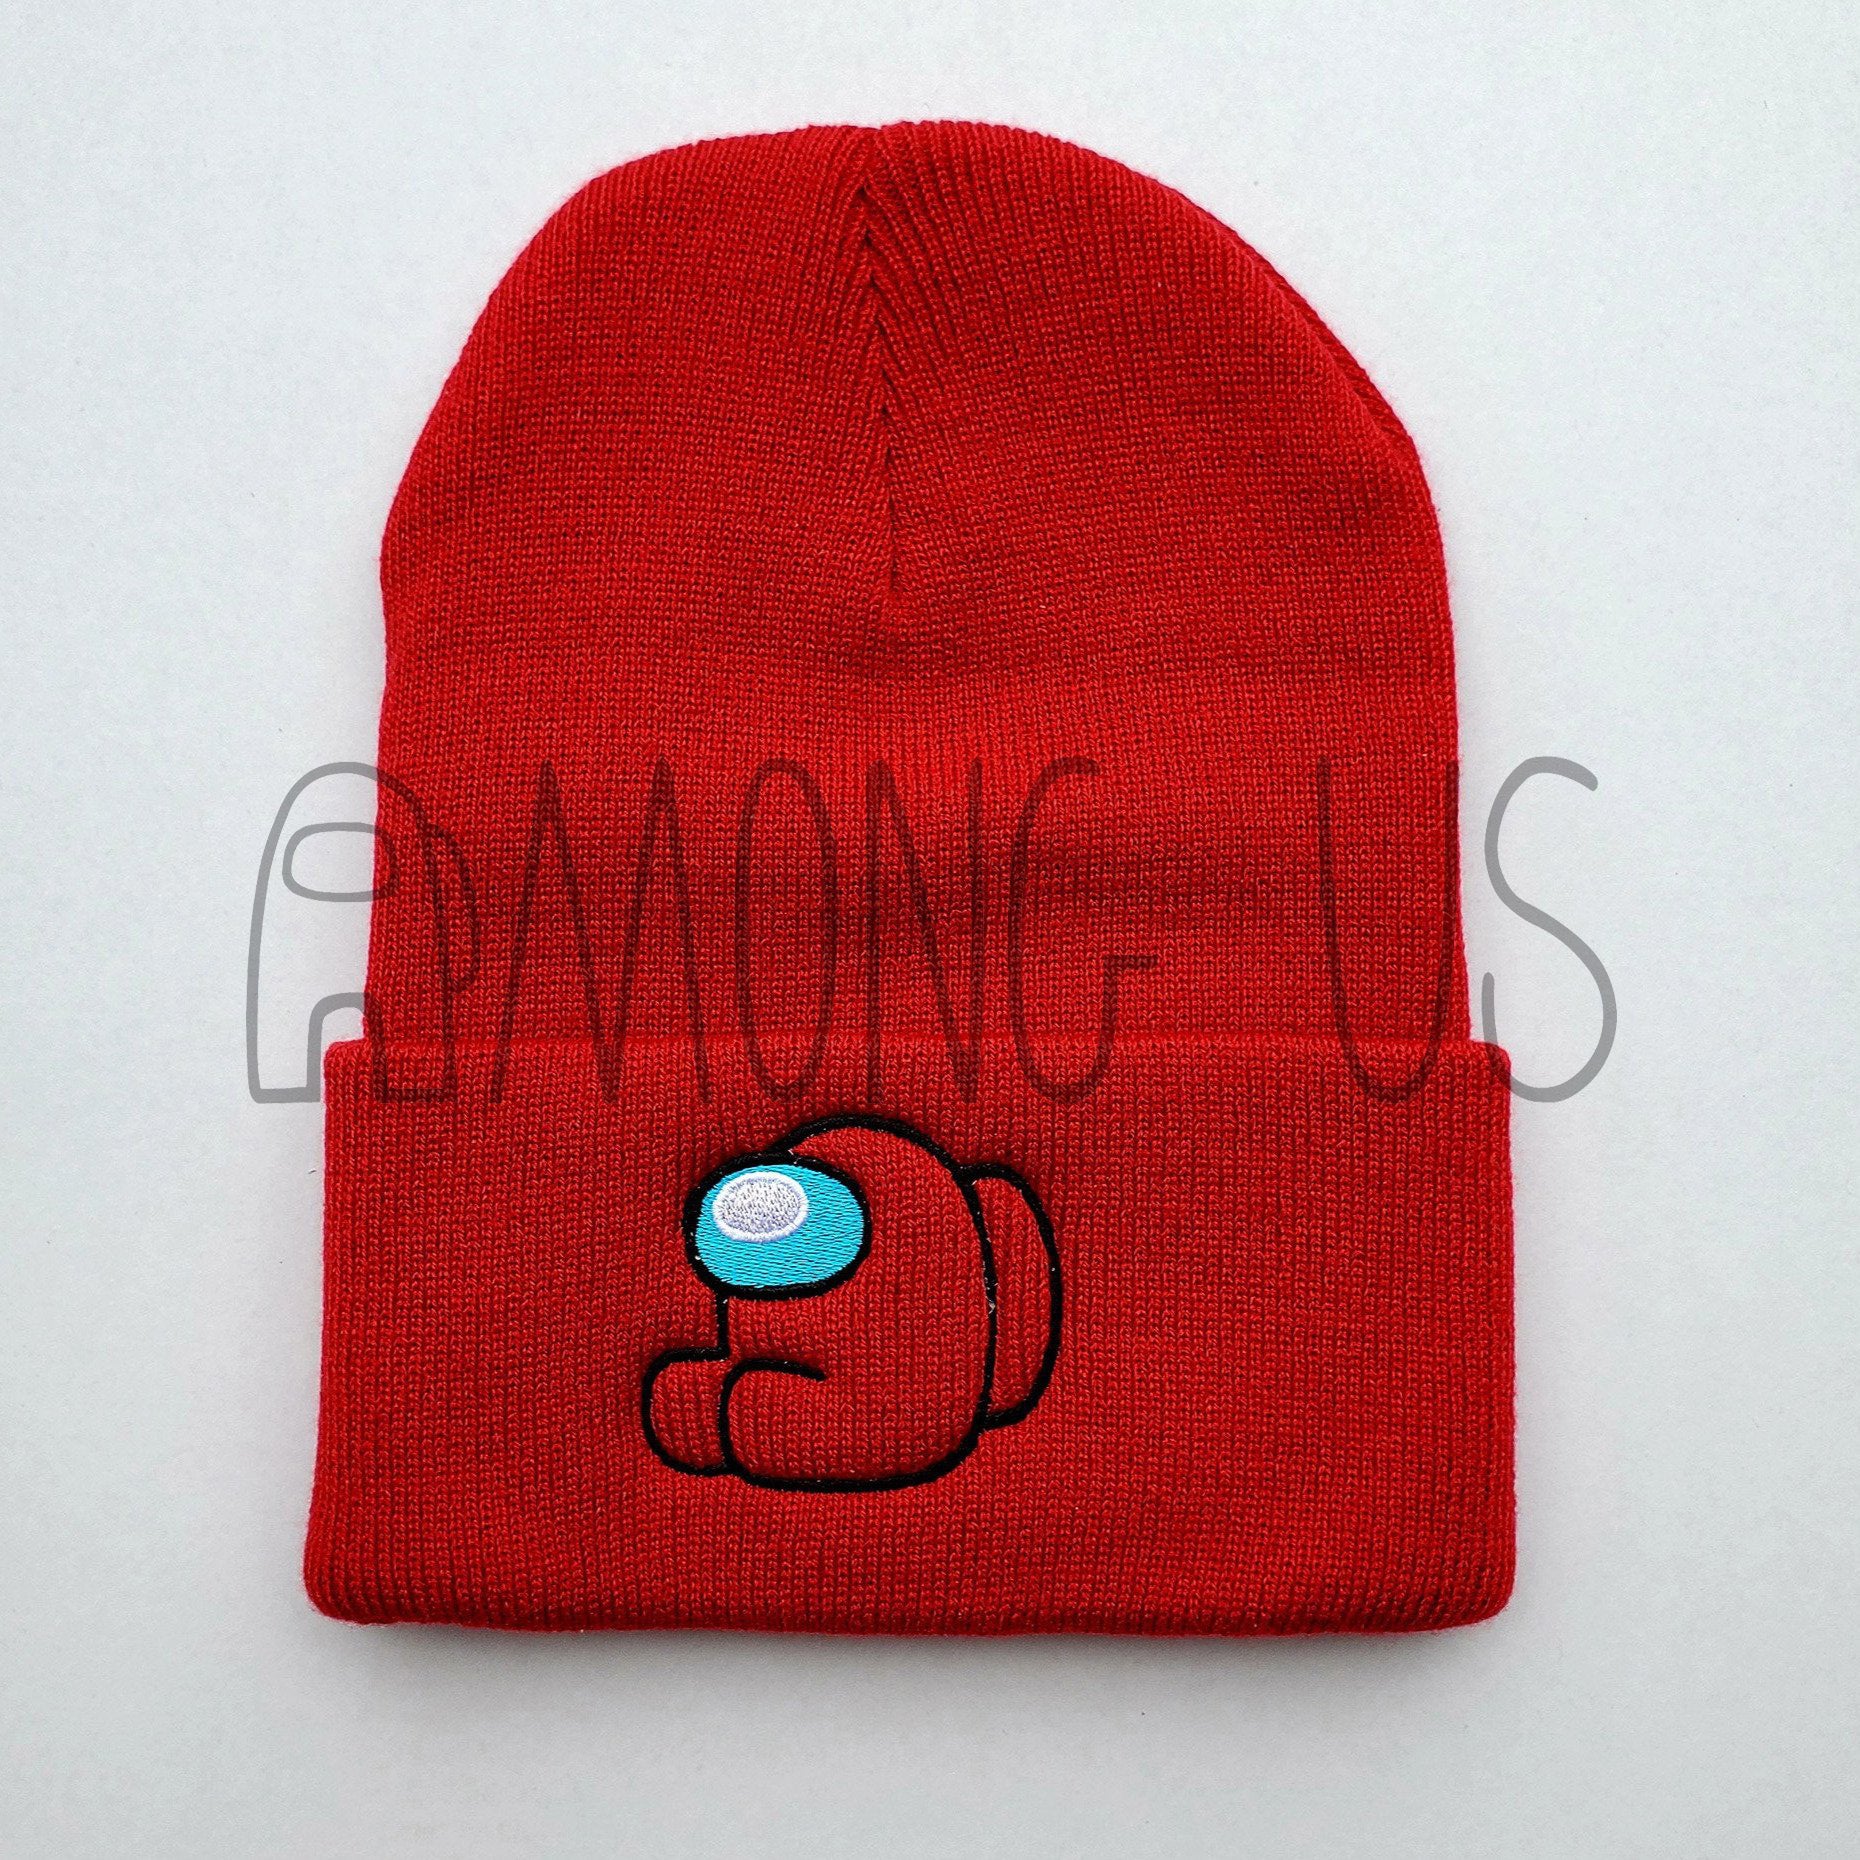 A flat lay photograph of the red Among Us: Crewmate Beanie. The brim of the beanie shows an embroidered sitting red crewmate.